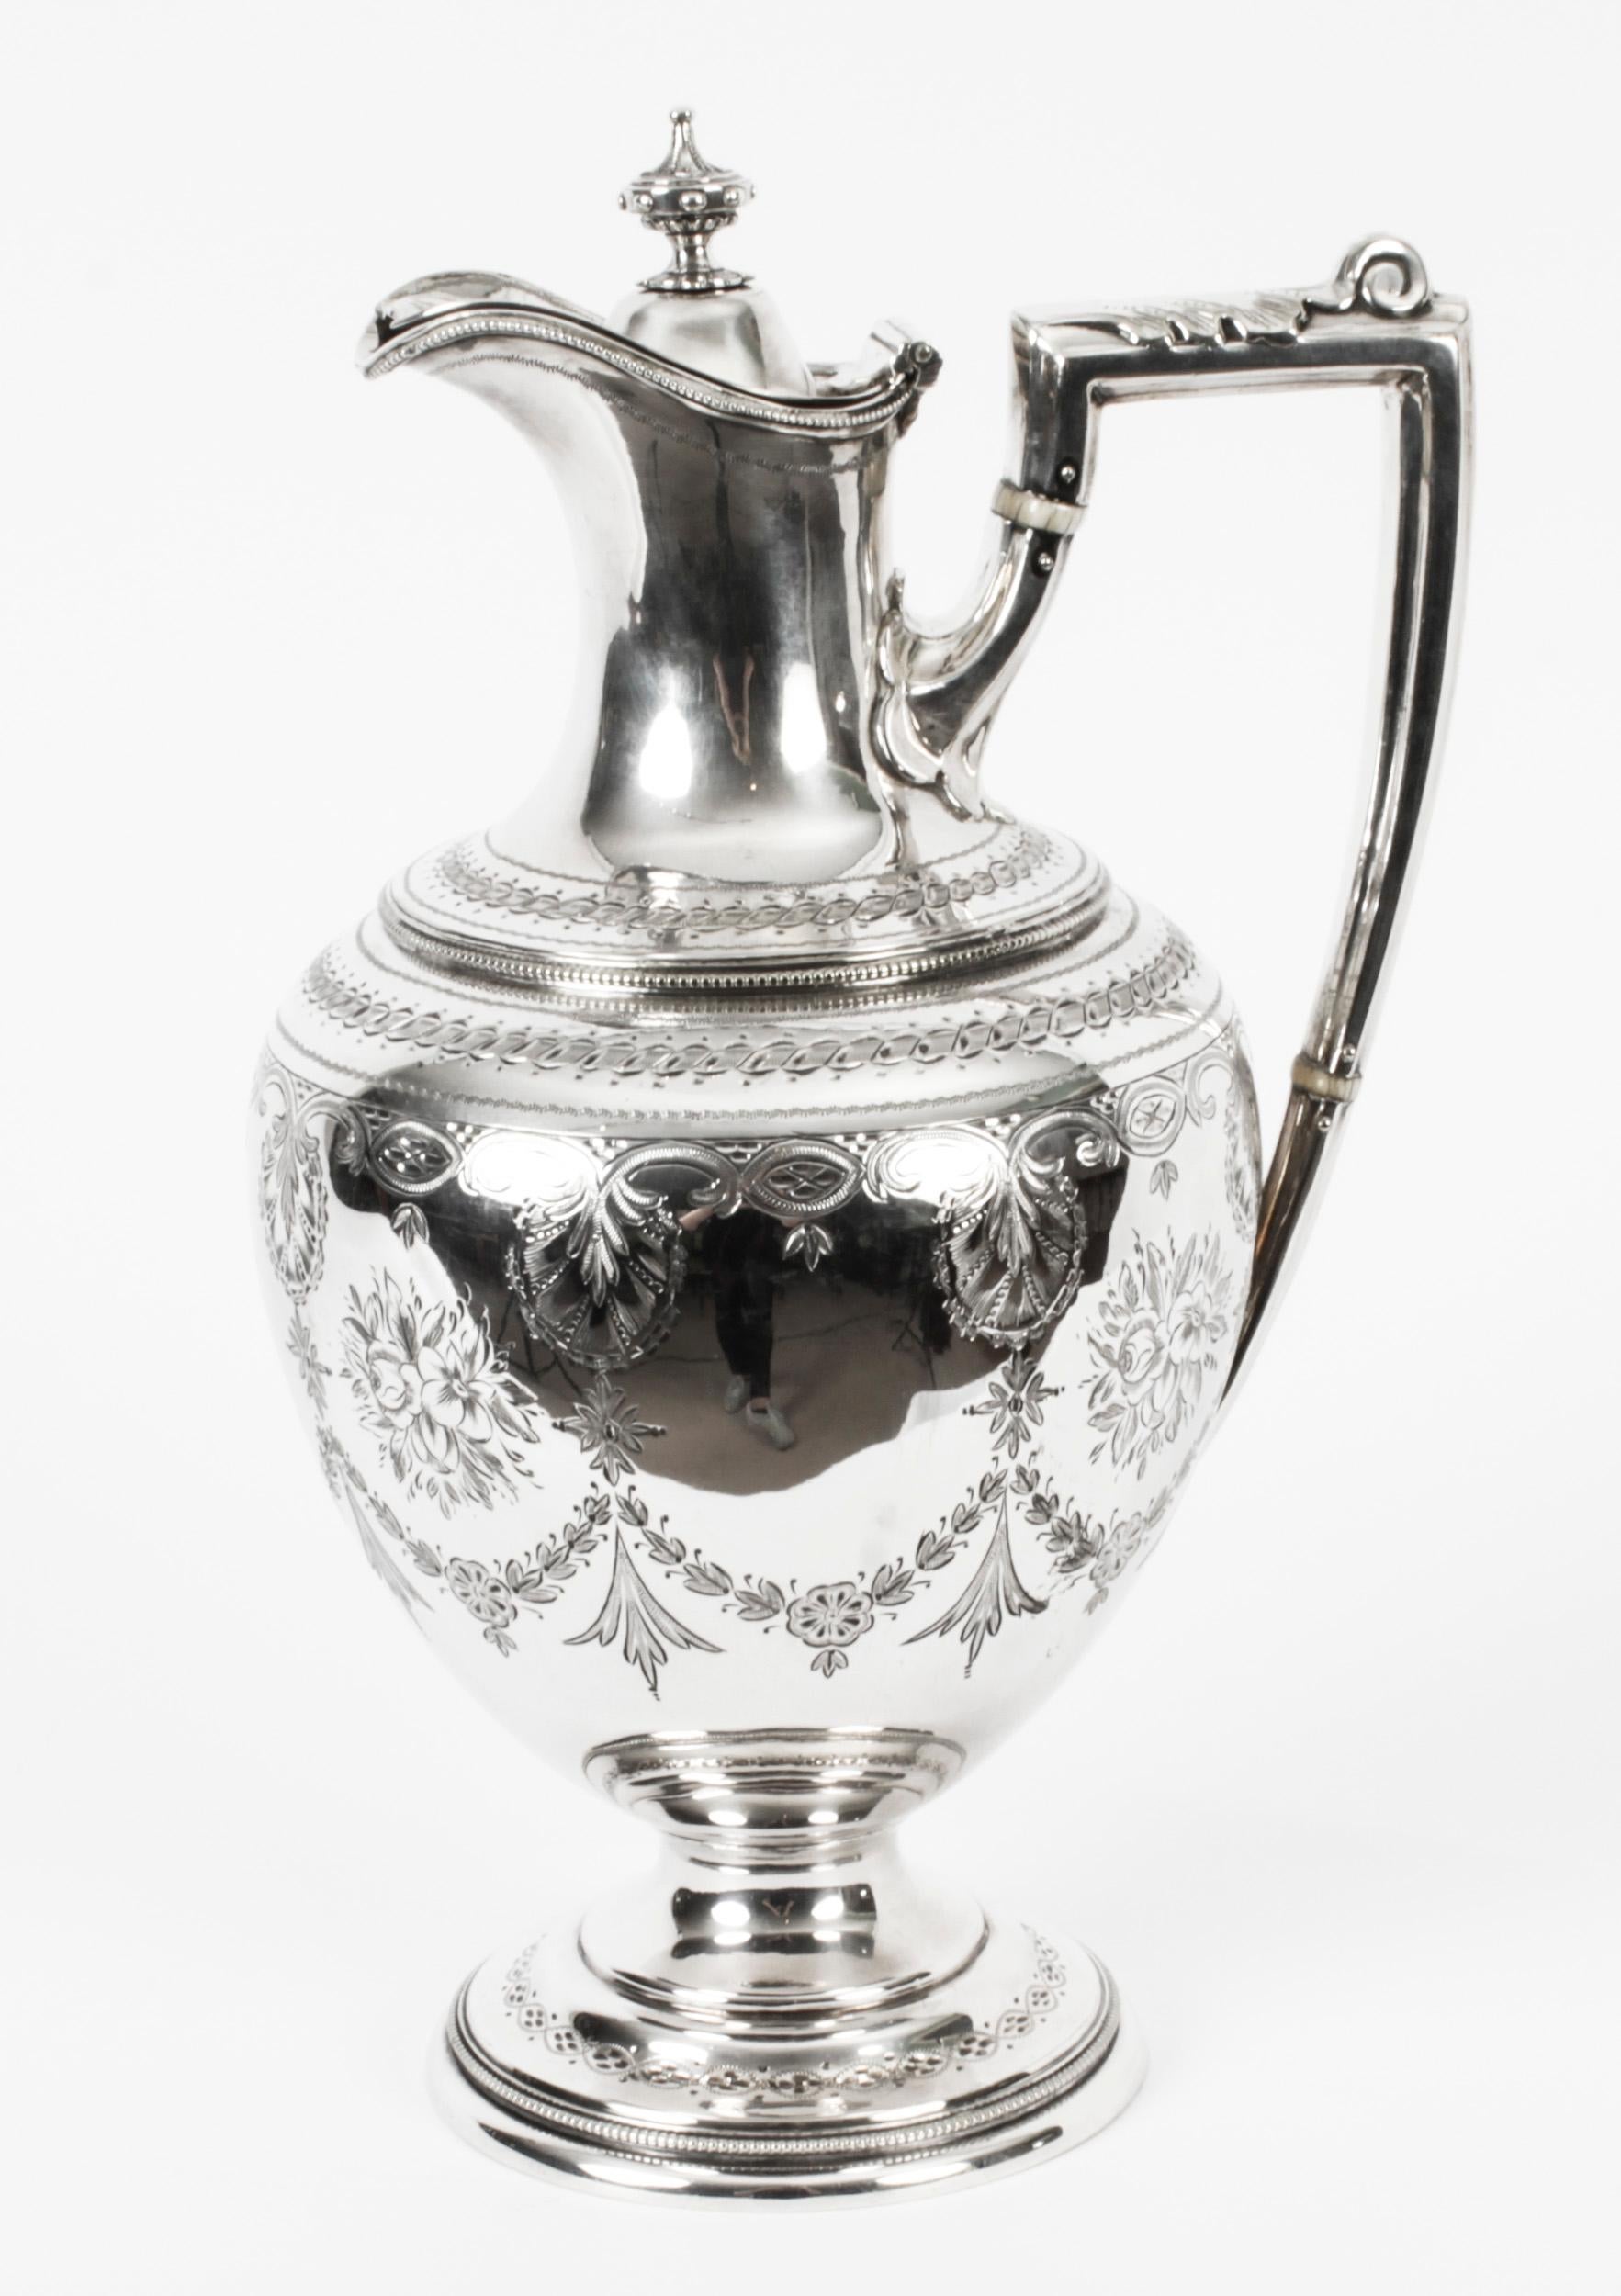 This is a truly stunning English Victorian silver-plated claret jug, bearing the makers' mark of the renowned silversmiths, Frank Cobb & Co Ltd, circa 1880 in date.
 
This magnificent claret jug has a charming rounded shape, stands on an elegant